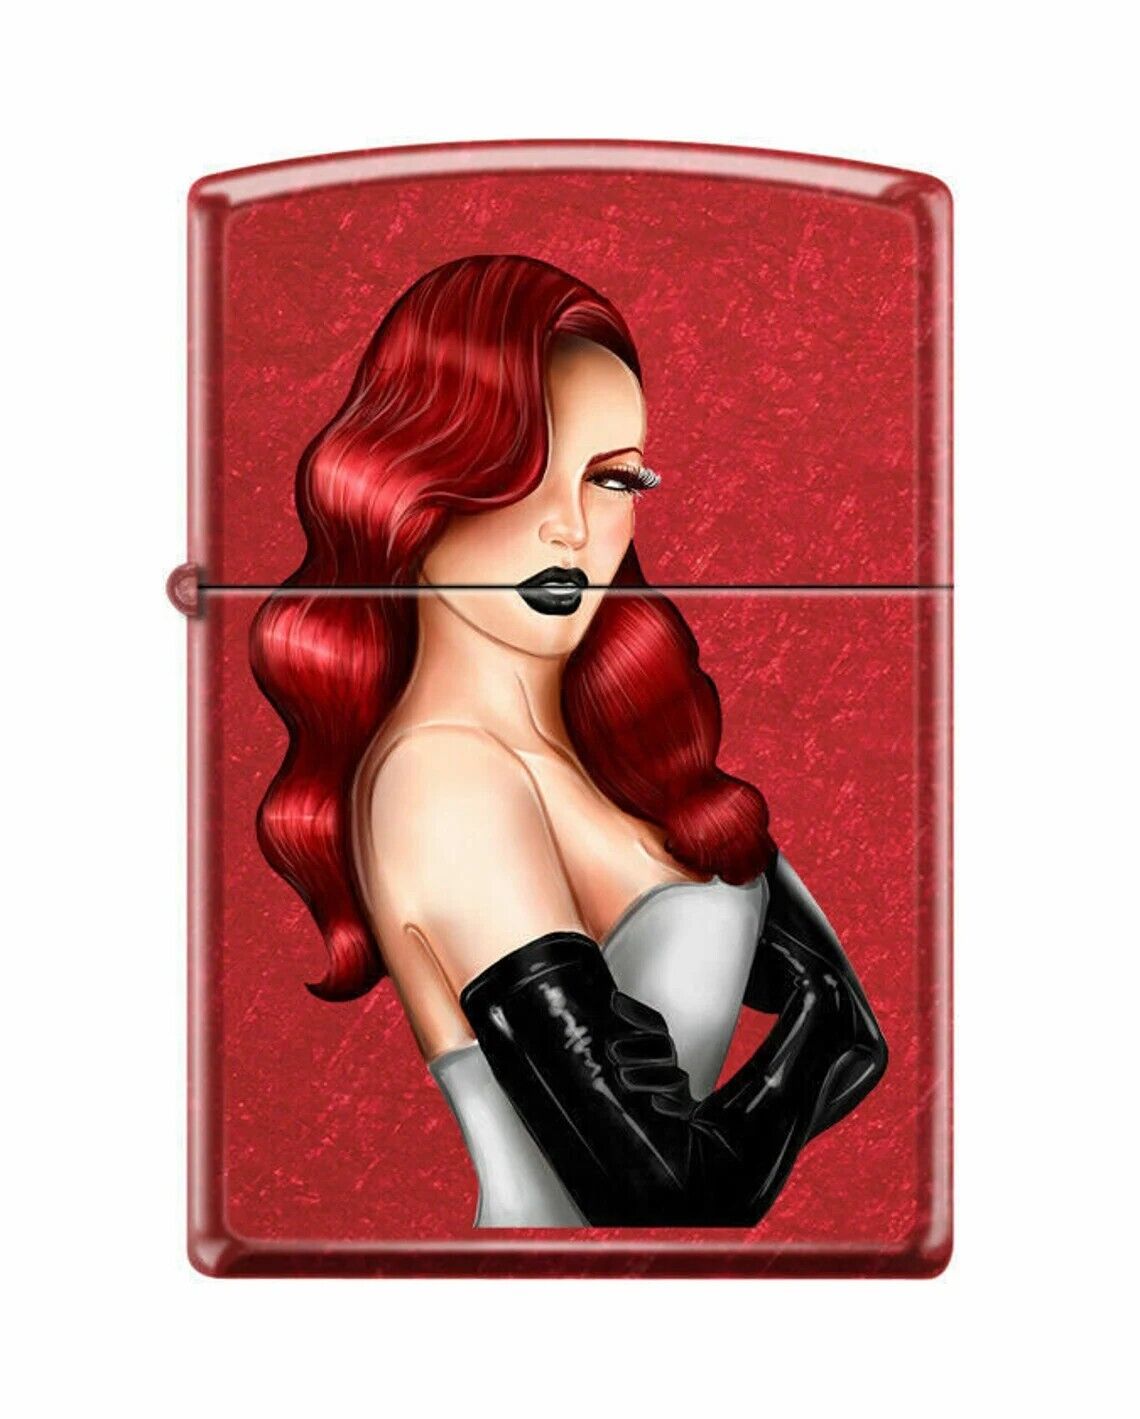 Sweet Candy Apple Red Retro Jessica Pinup Girl Zippo Lighter Lifetime warranty